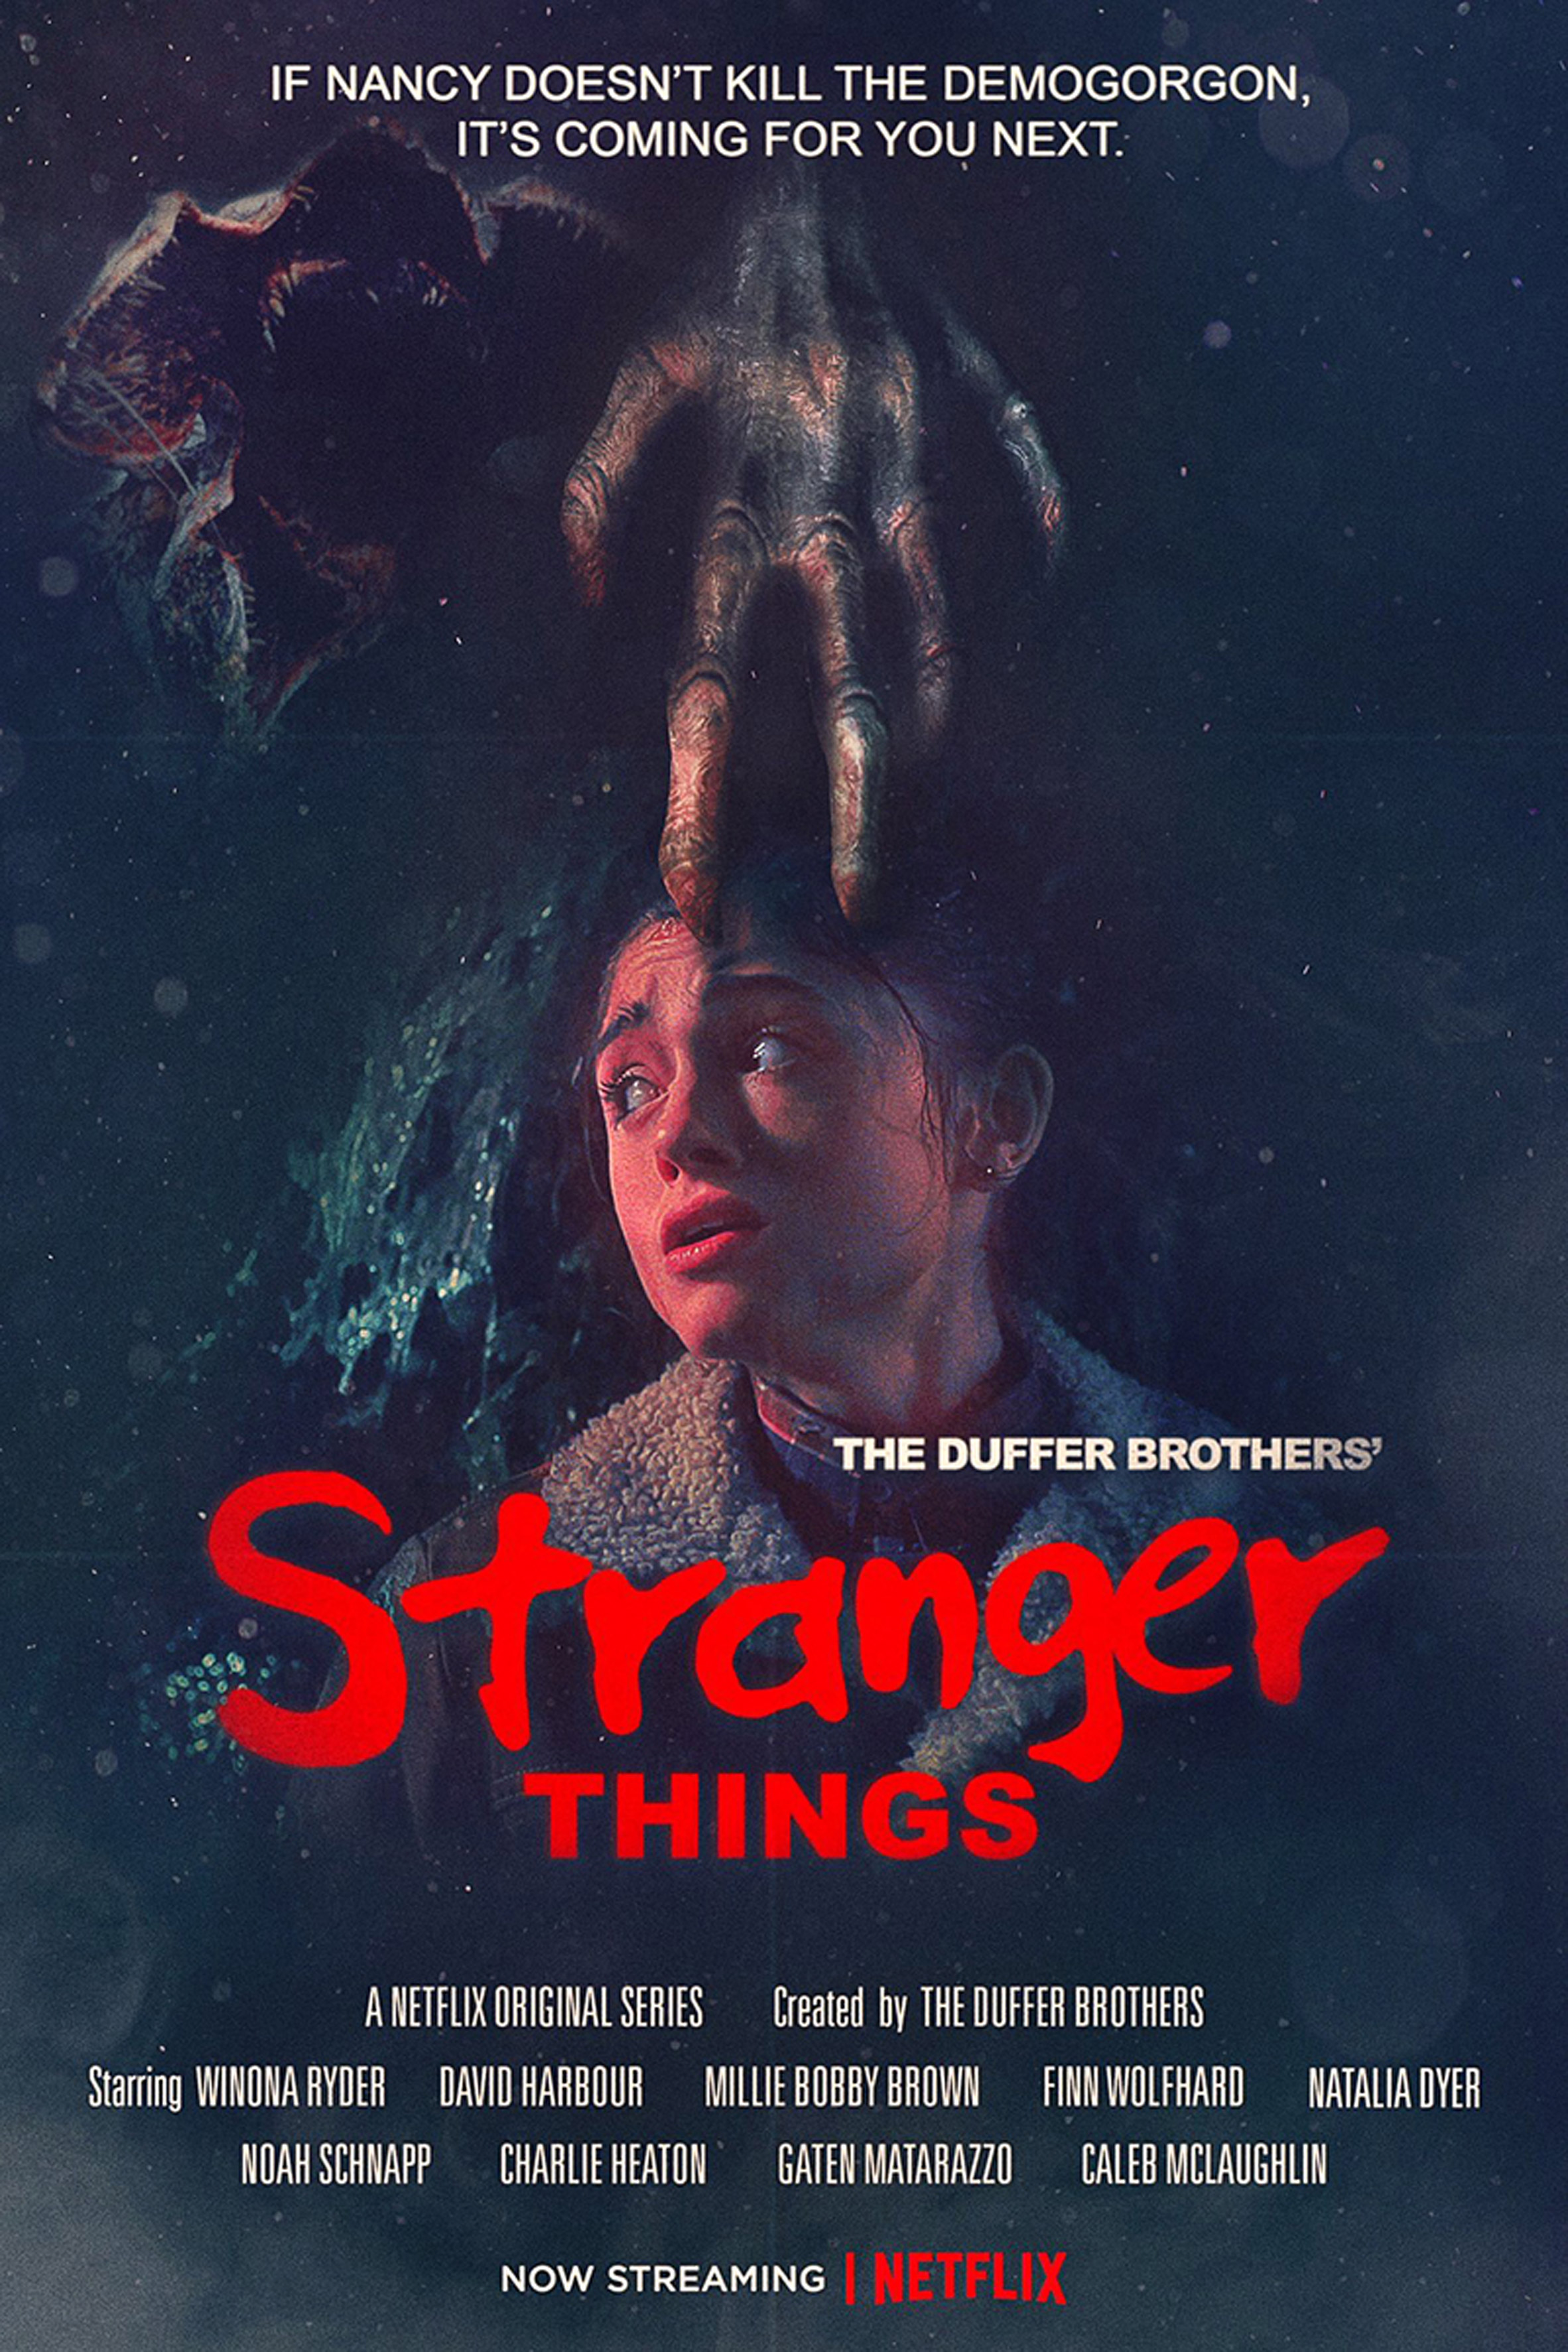 Stranger Things season two posters designed in the style of 80s sci fi films.